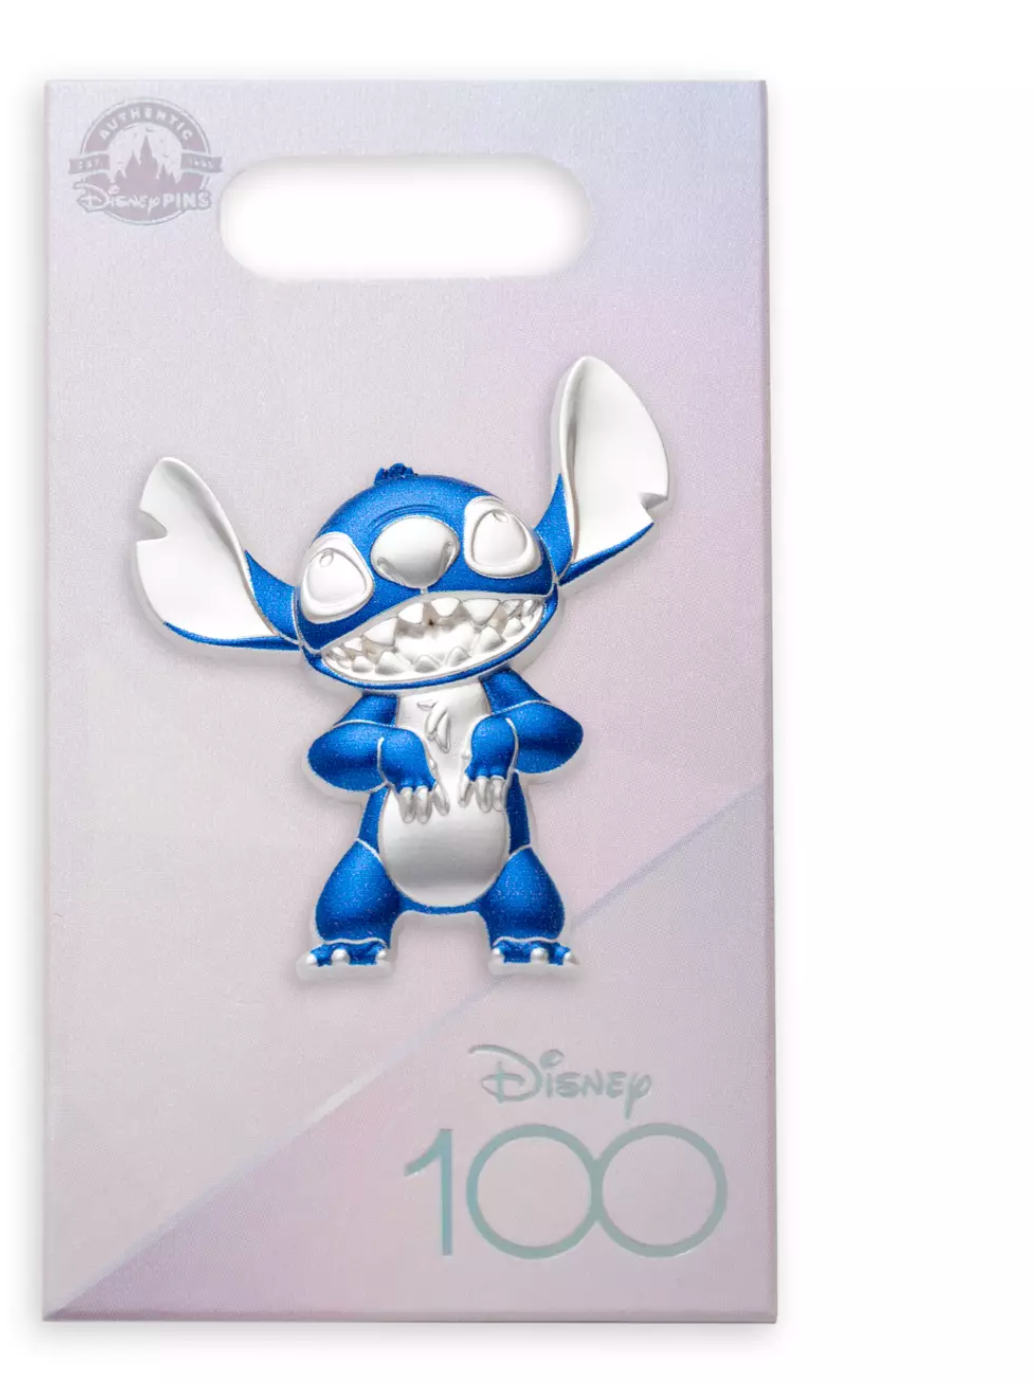 Disney 100 Years of Wonder Celebration Stitch 3D Pin New with Card